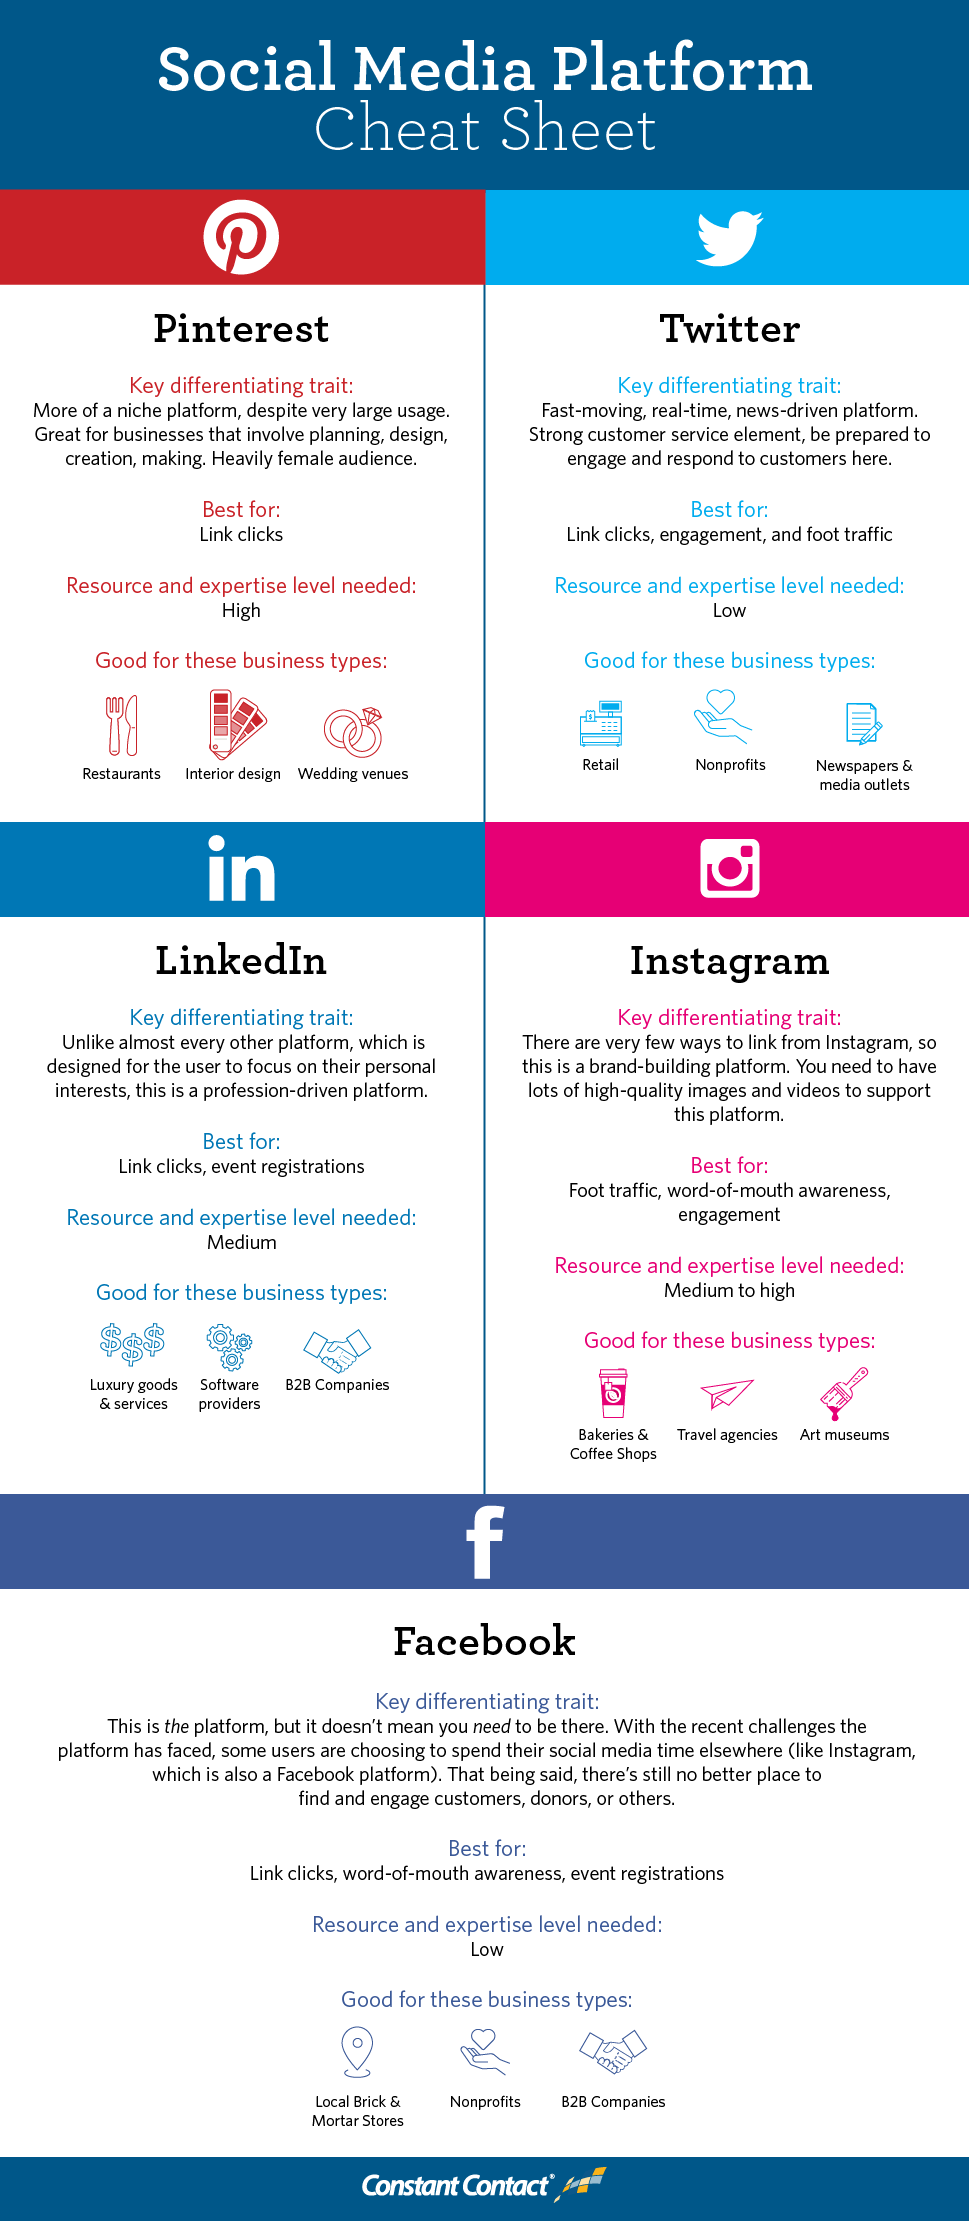 Which Social Media Platform is Right For Your Business in 2019?